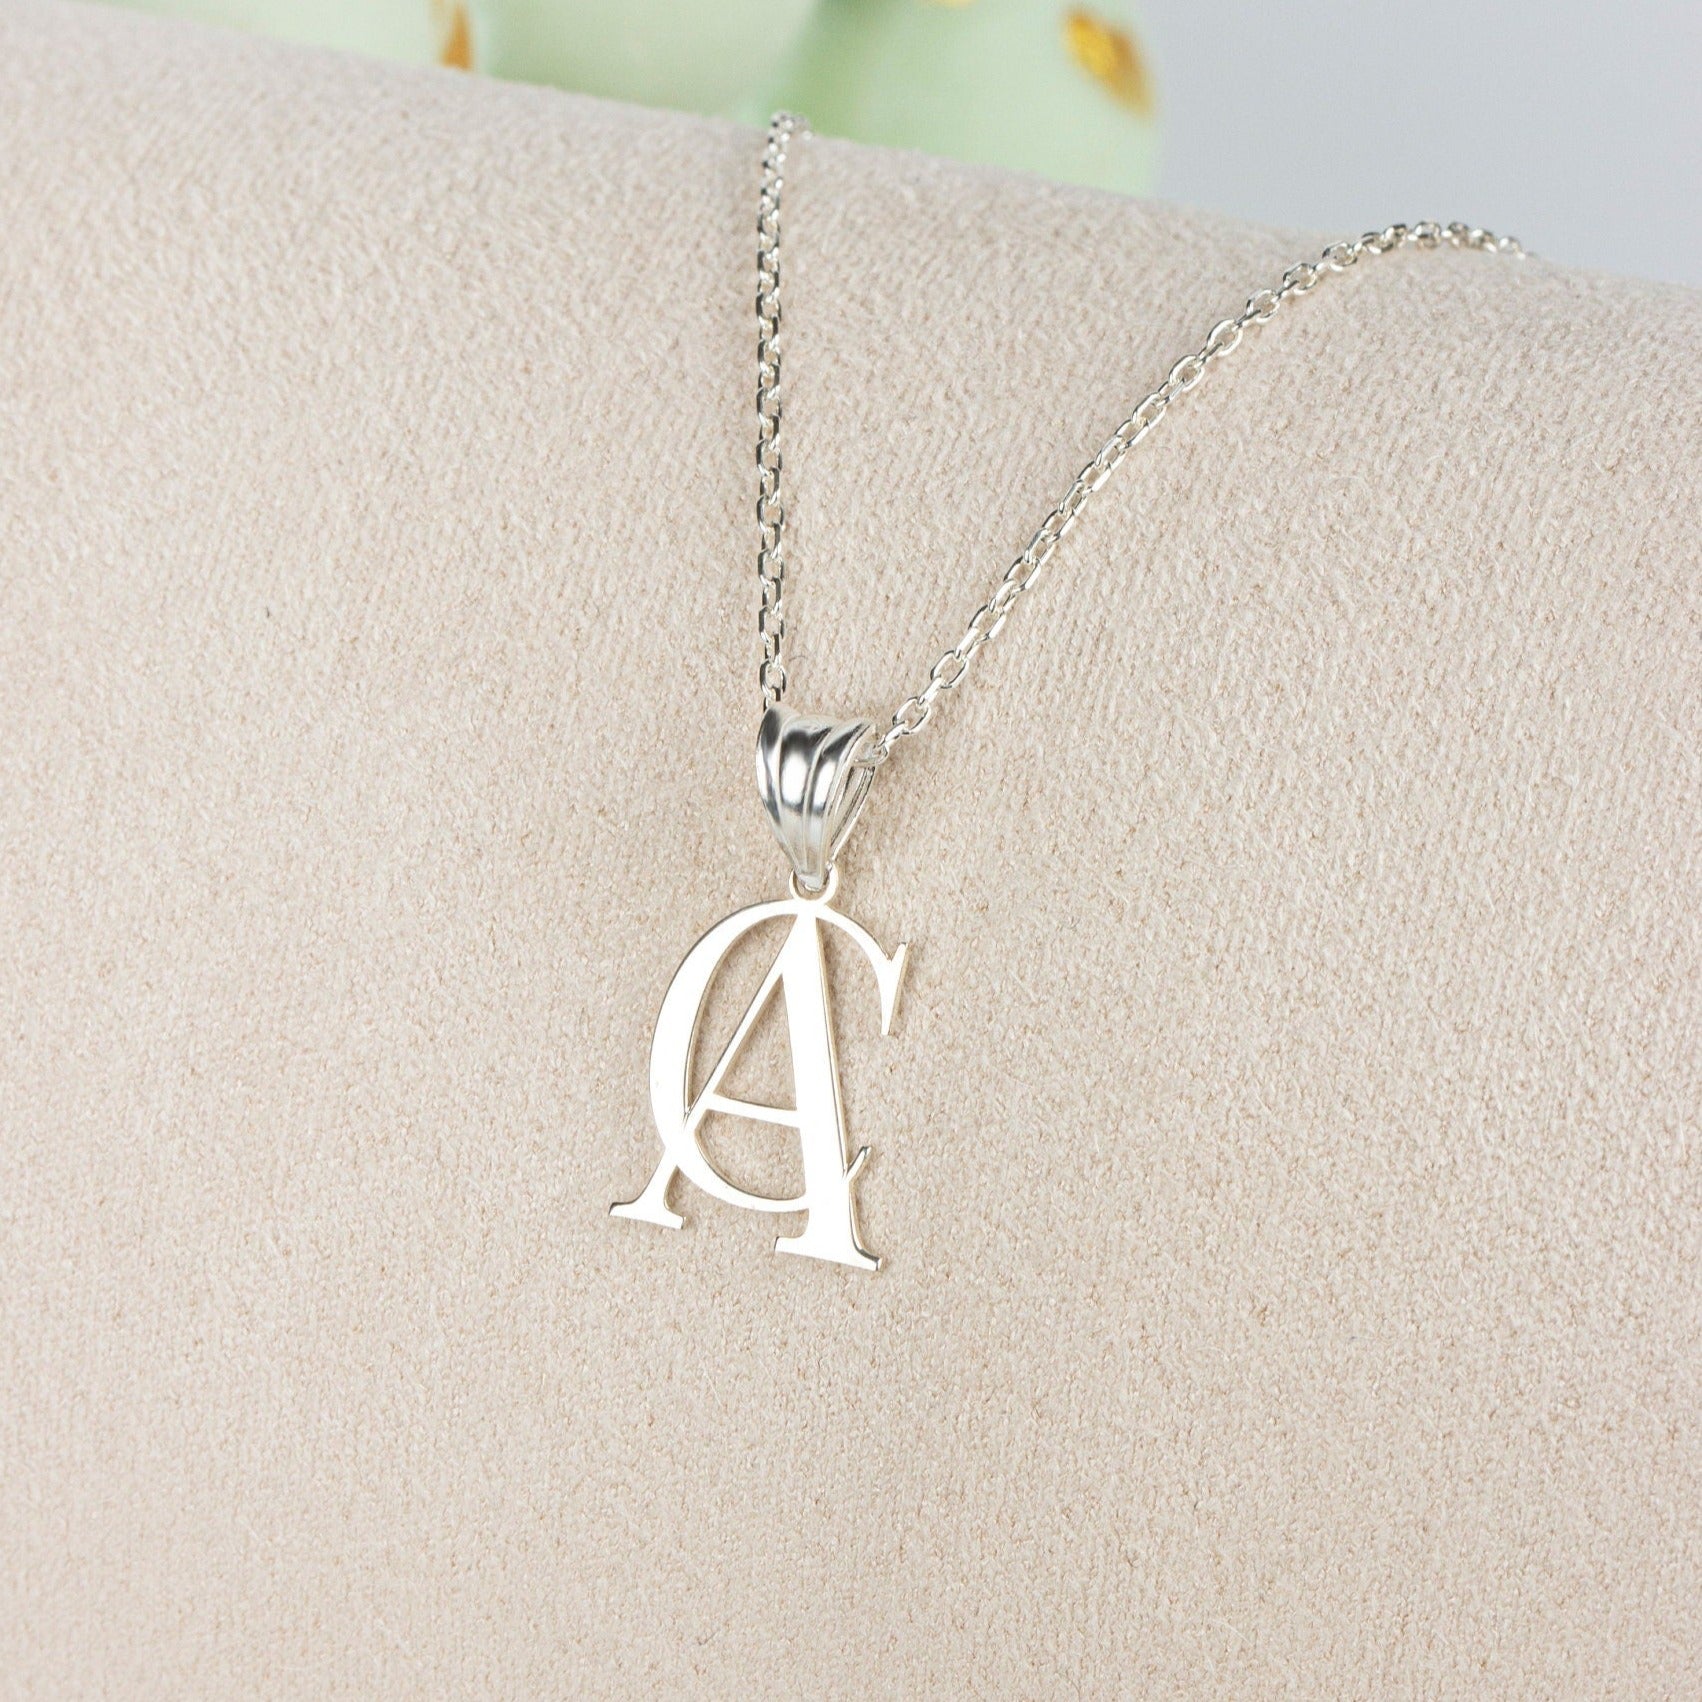 2 INITIAL STAMPED NECKLACE – Lavish Jewelss